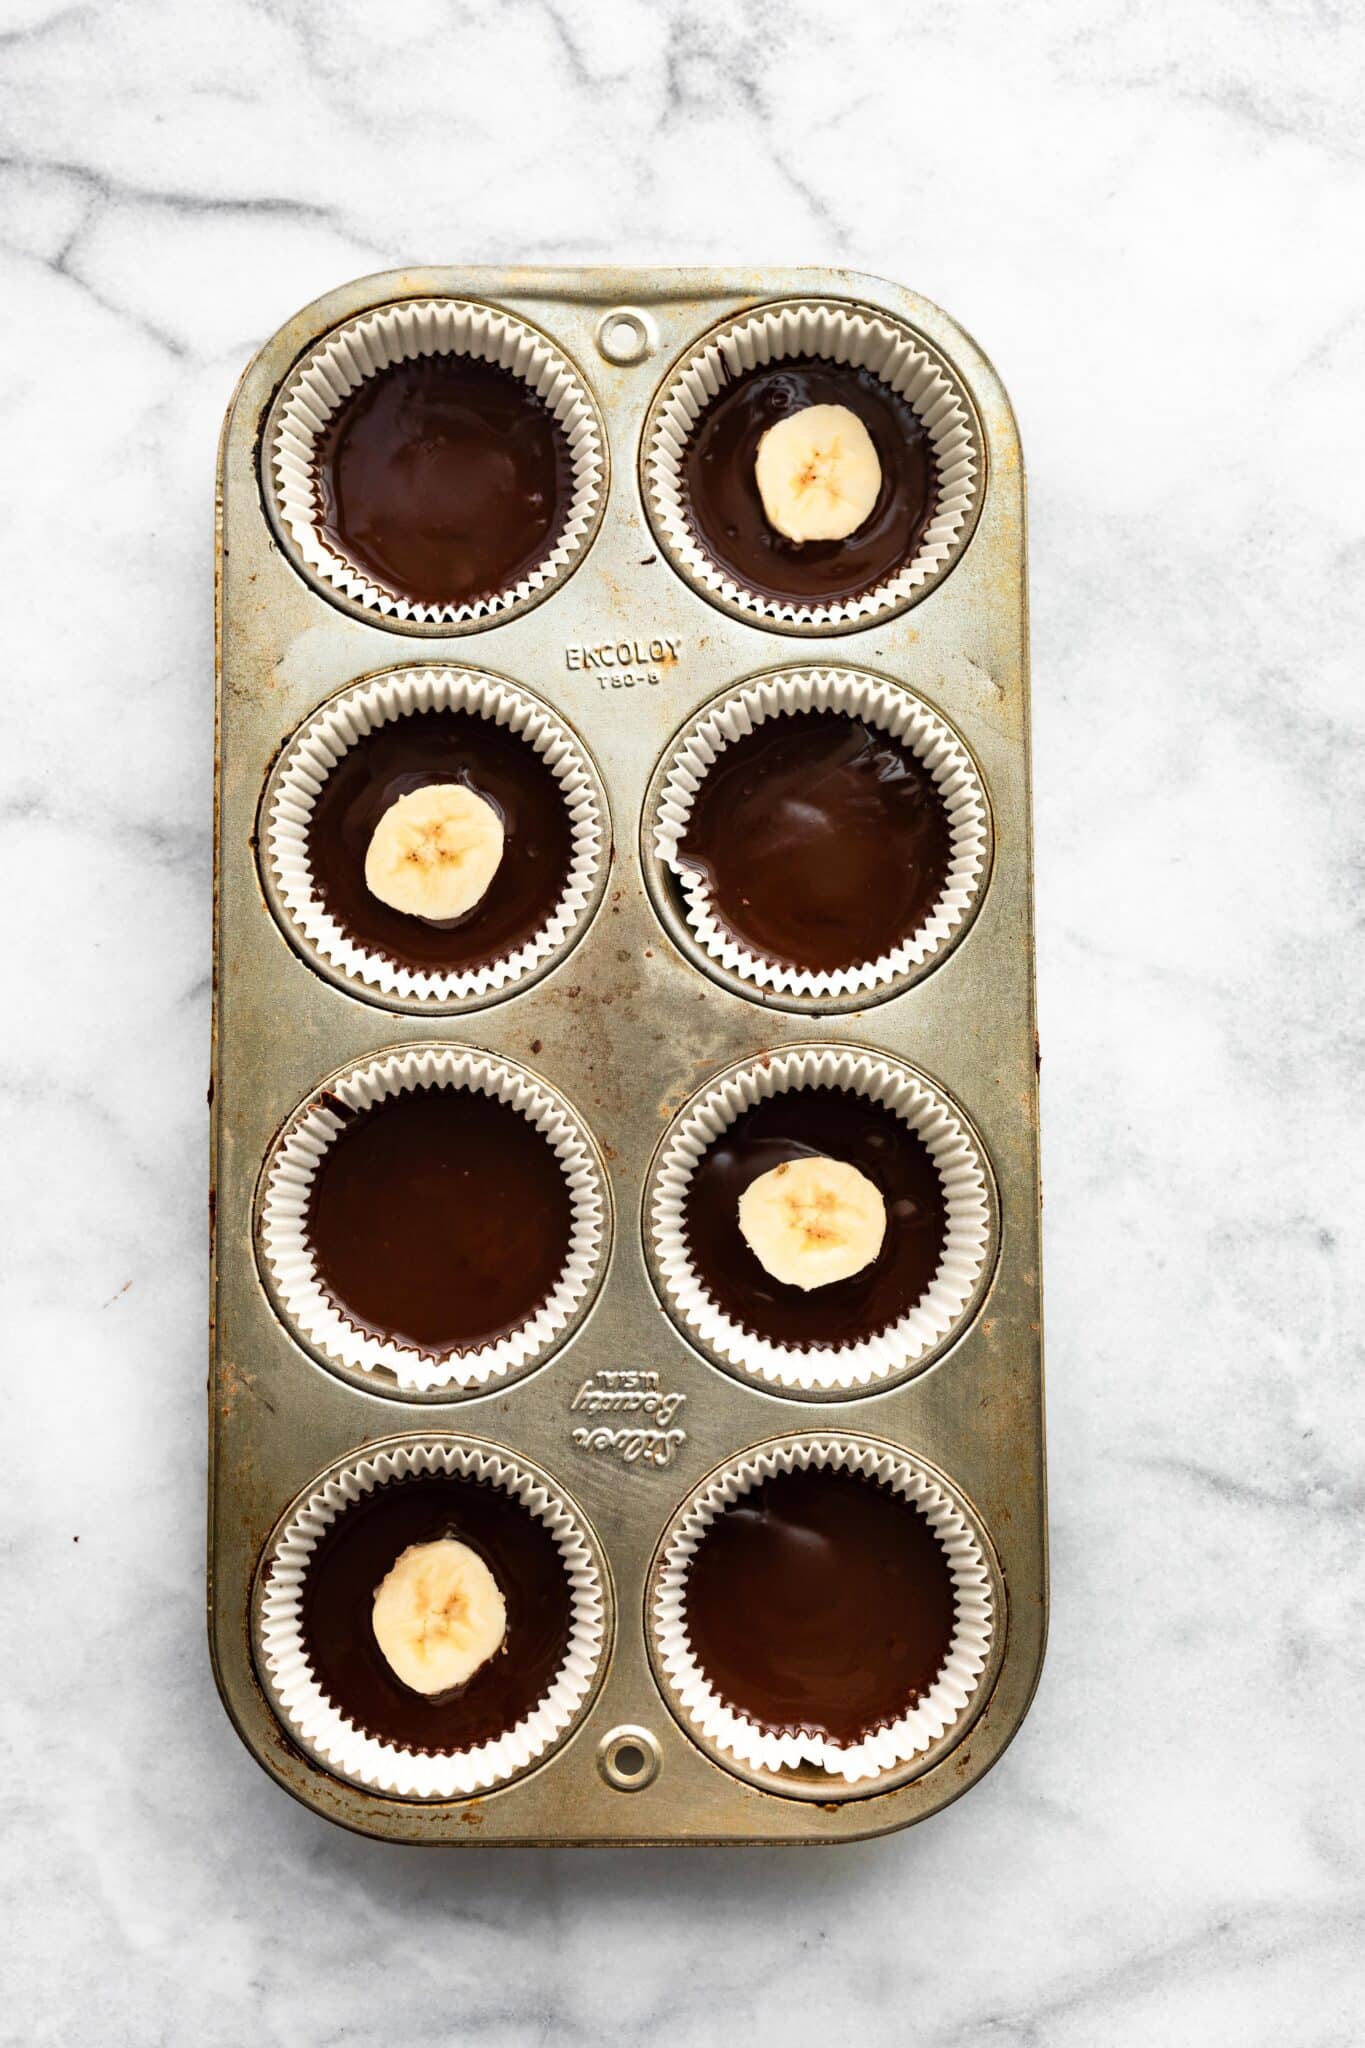 Eight Chocolate Almond Butter Cups with Banana slices on top of four of them.